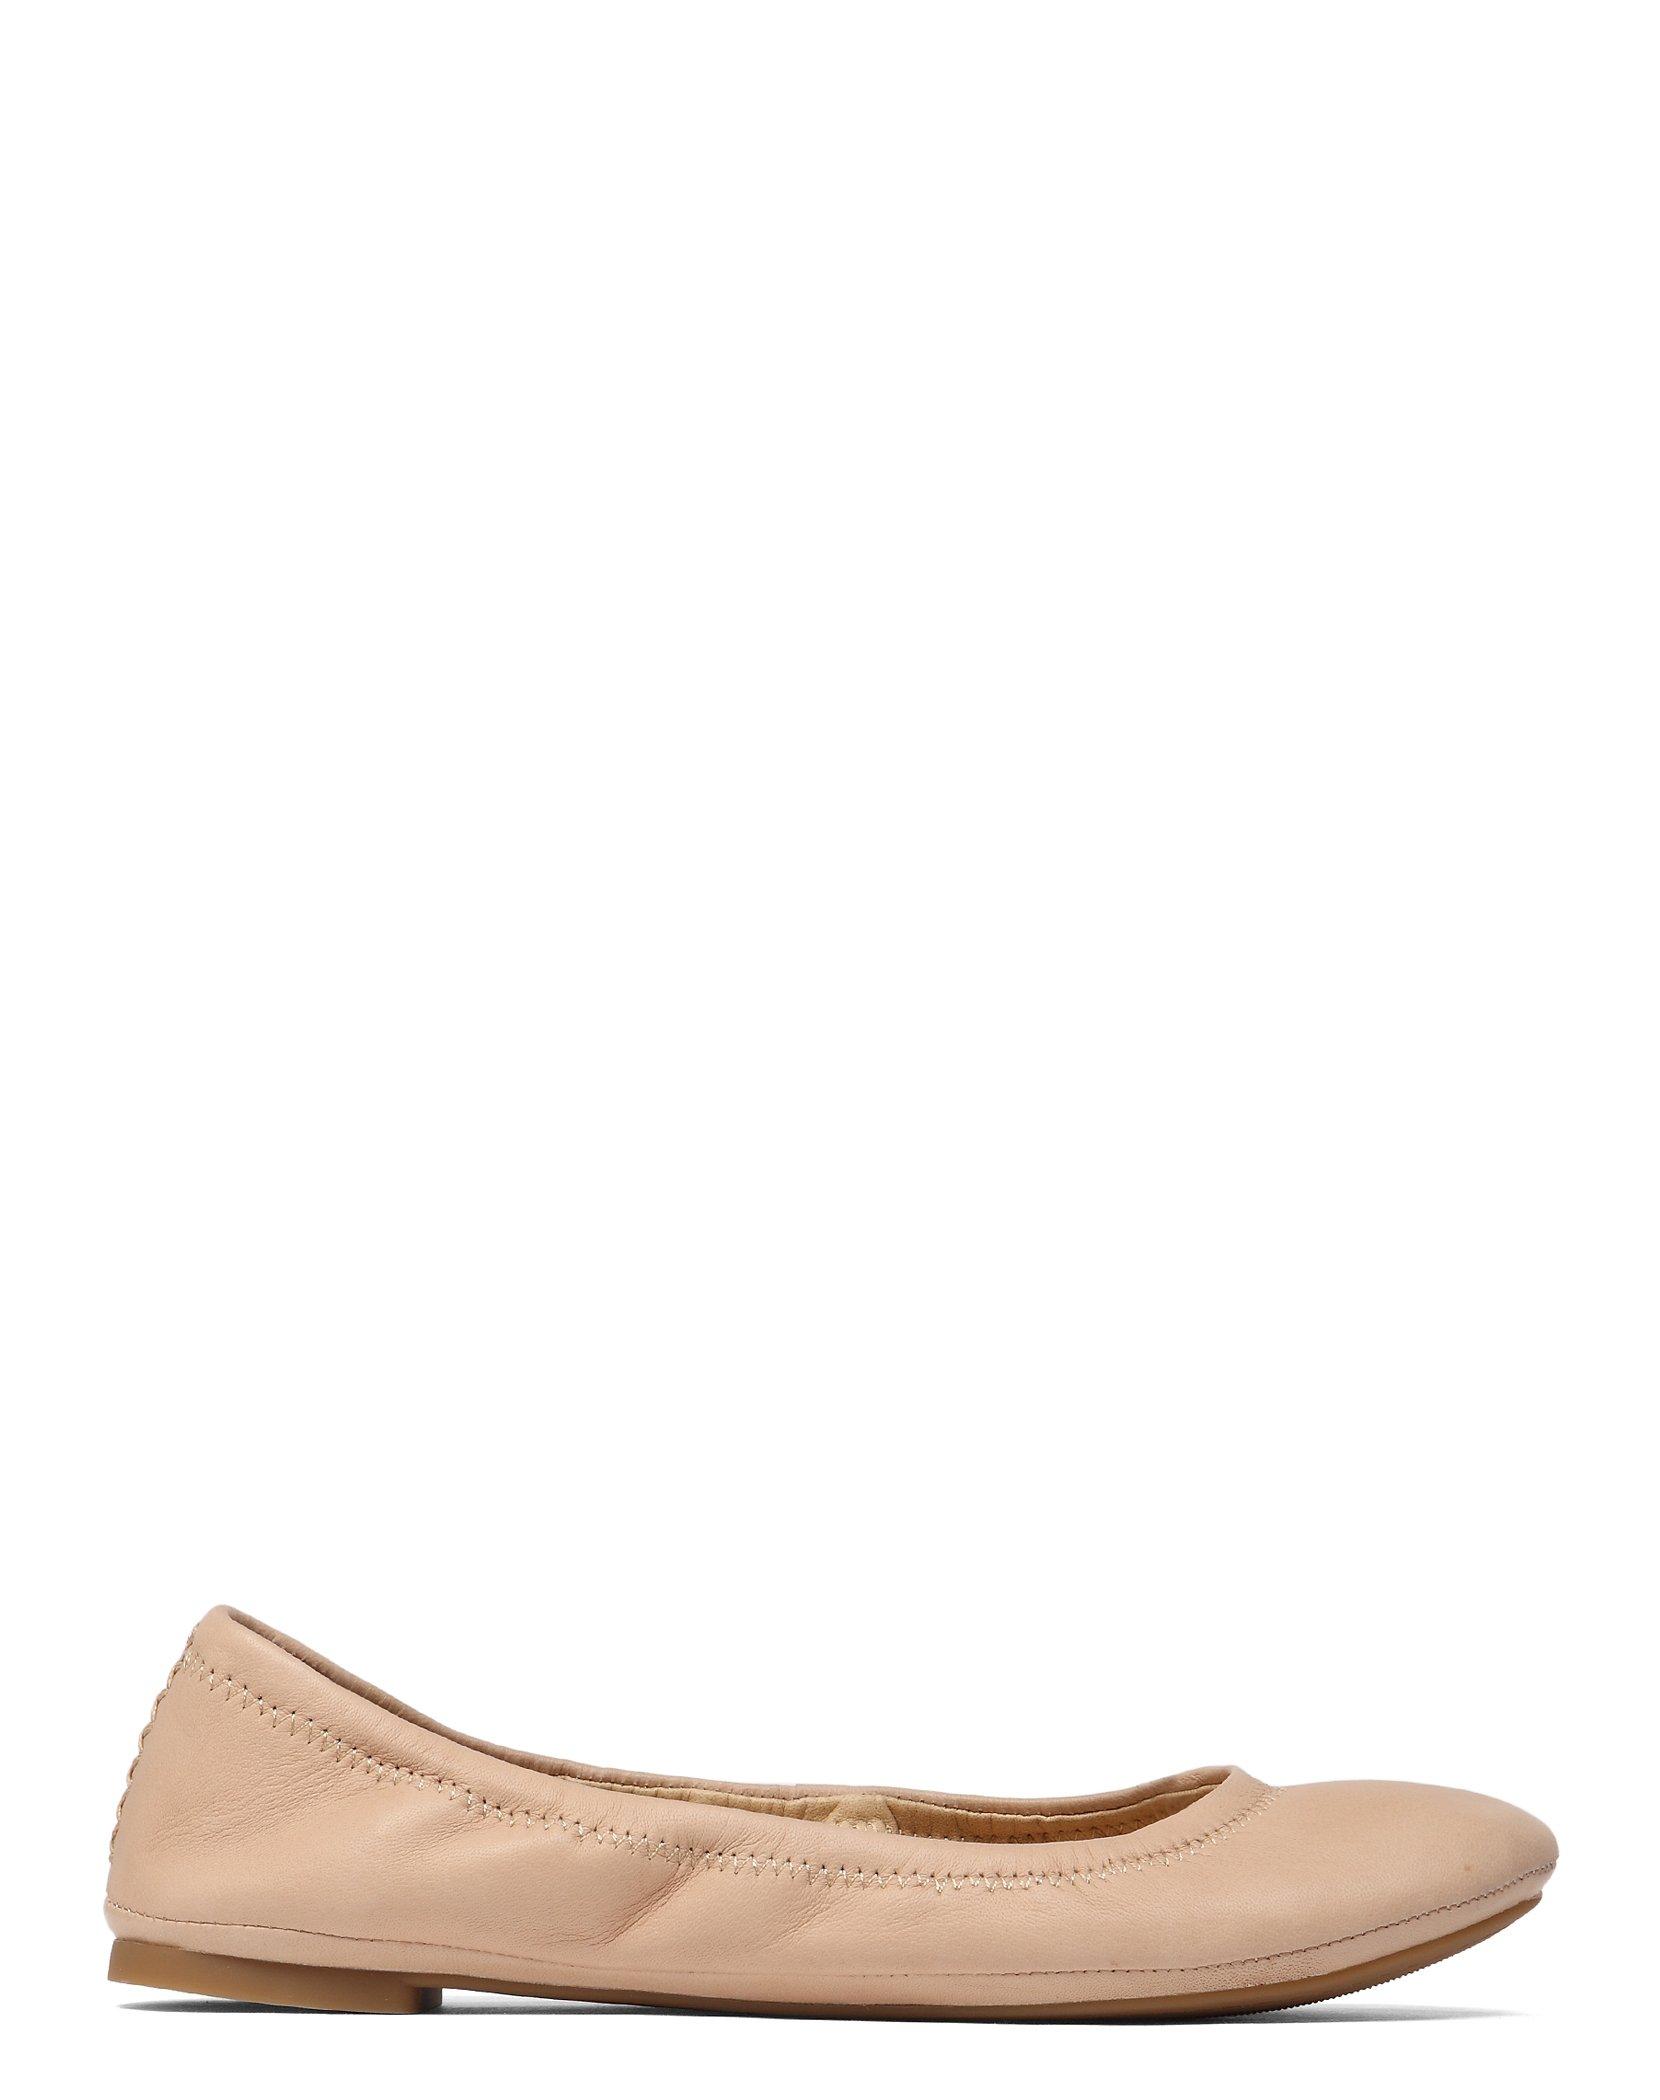 EMMIE LEATHER FLATS, image 4